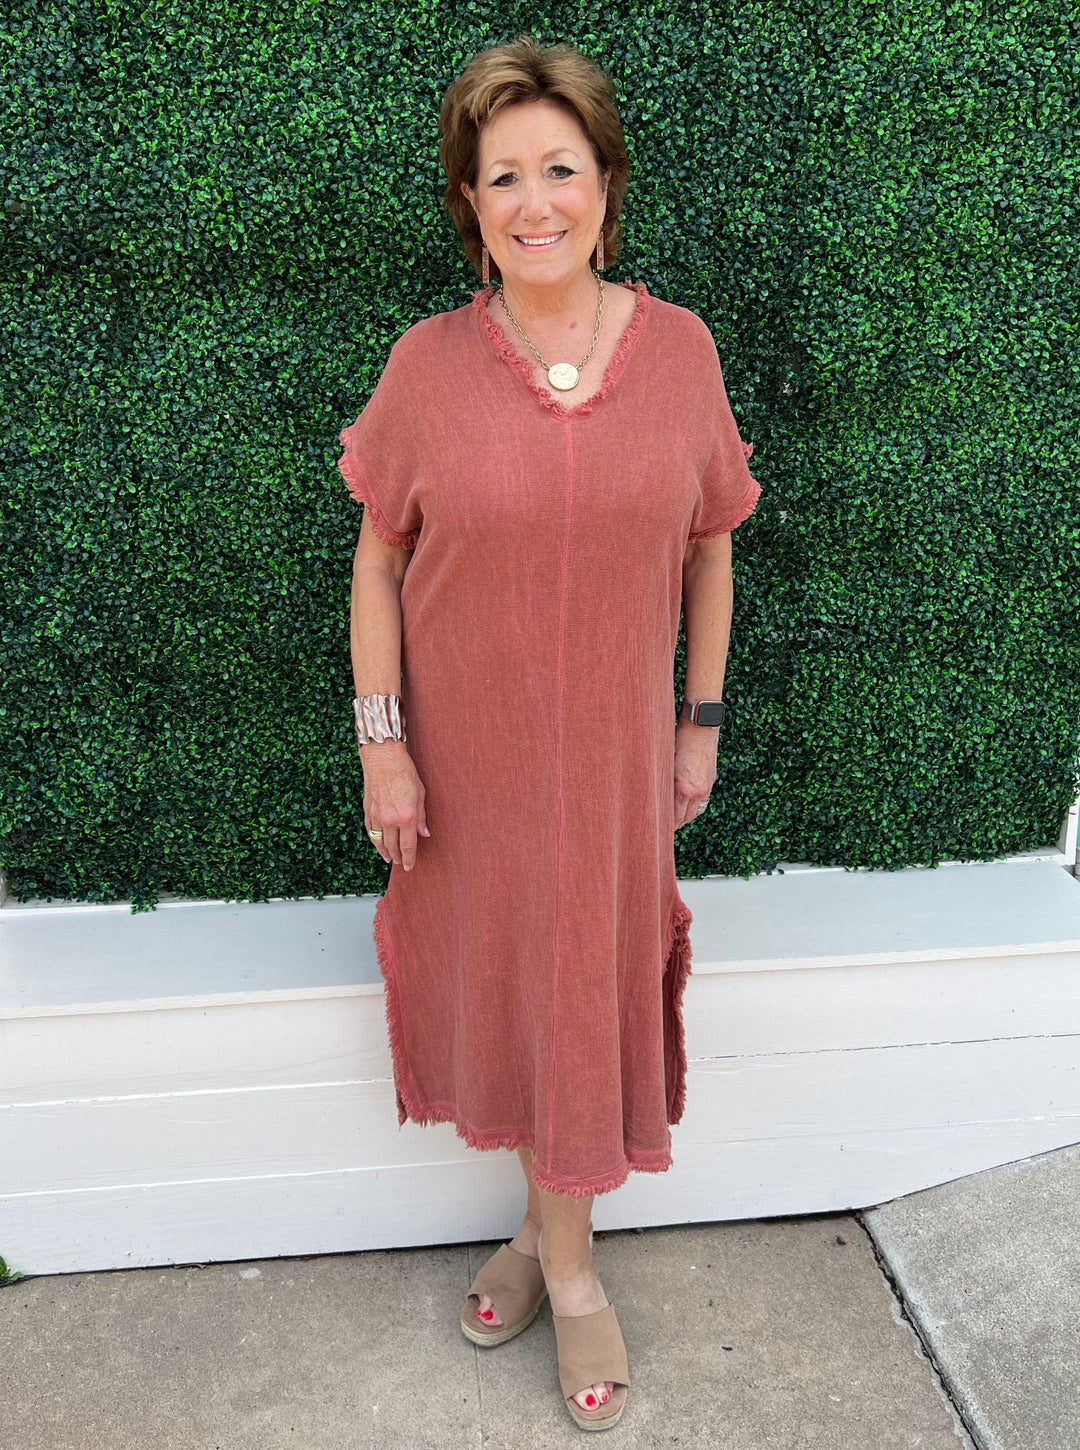 Tres Chic Houston women's store owner wears the new popular dress in brown